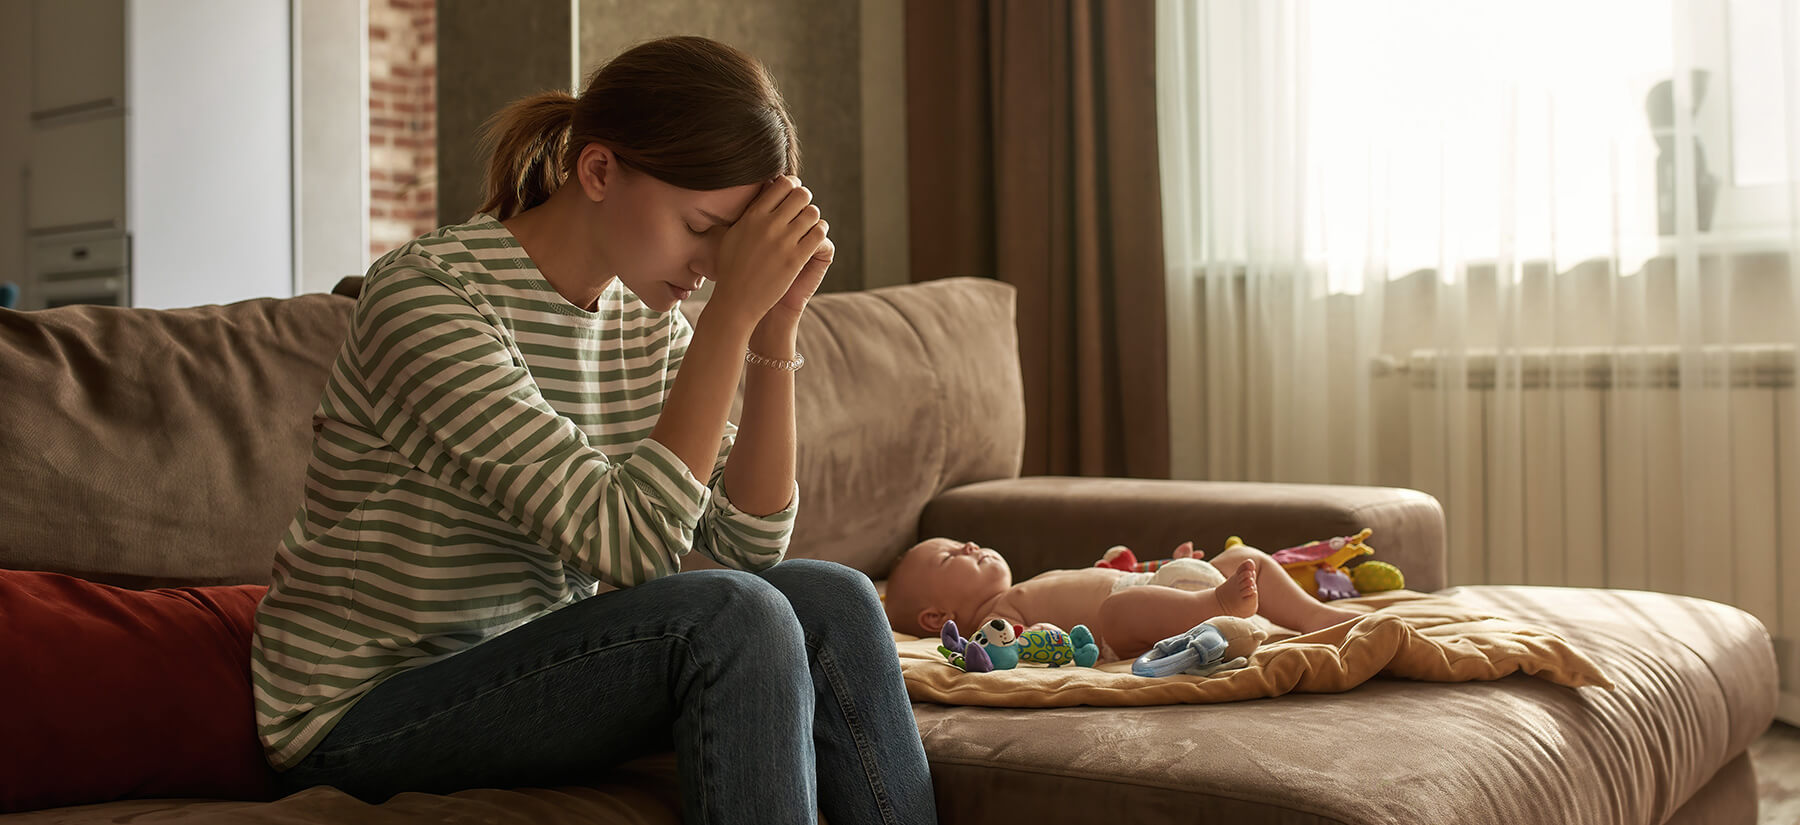 Ashamed and guilty: What it really feels like when you don't bond with your baby